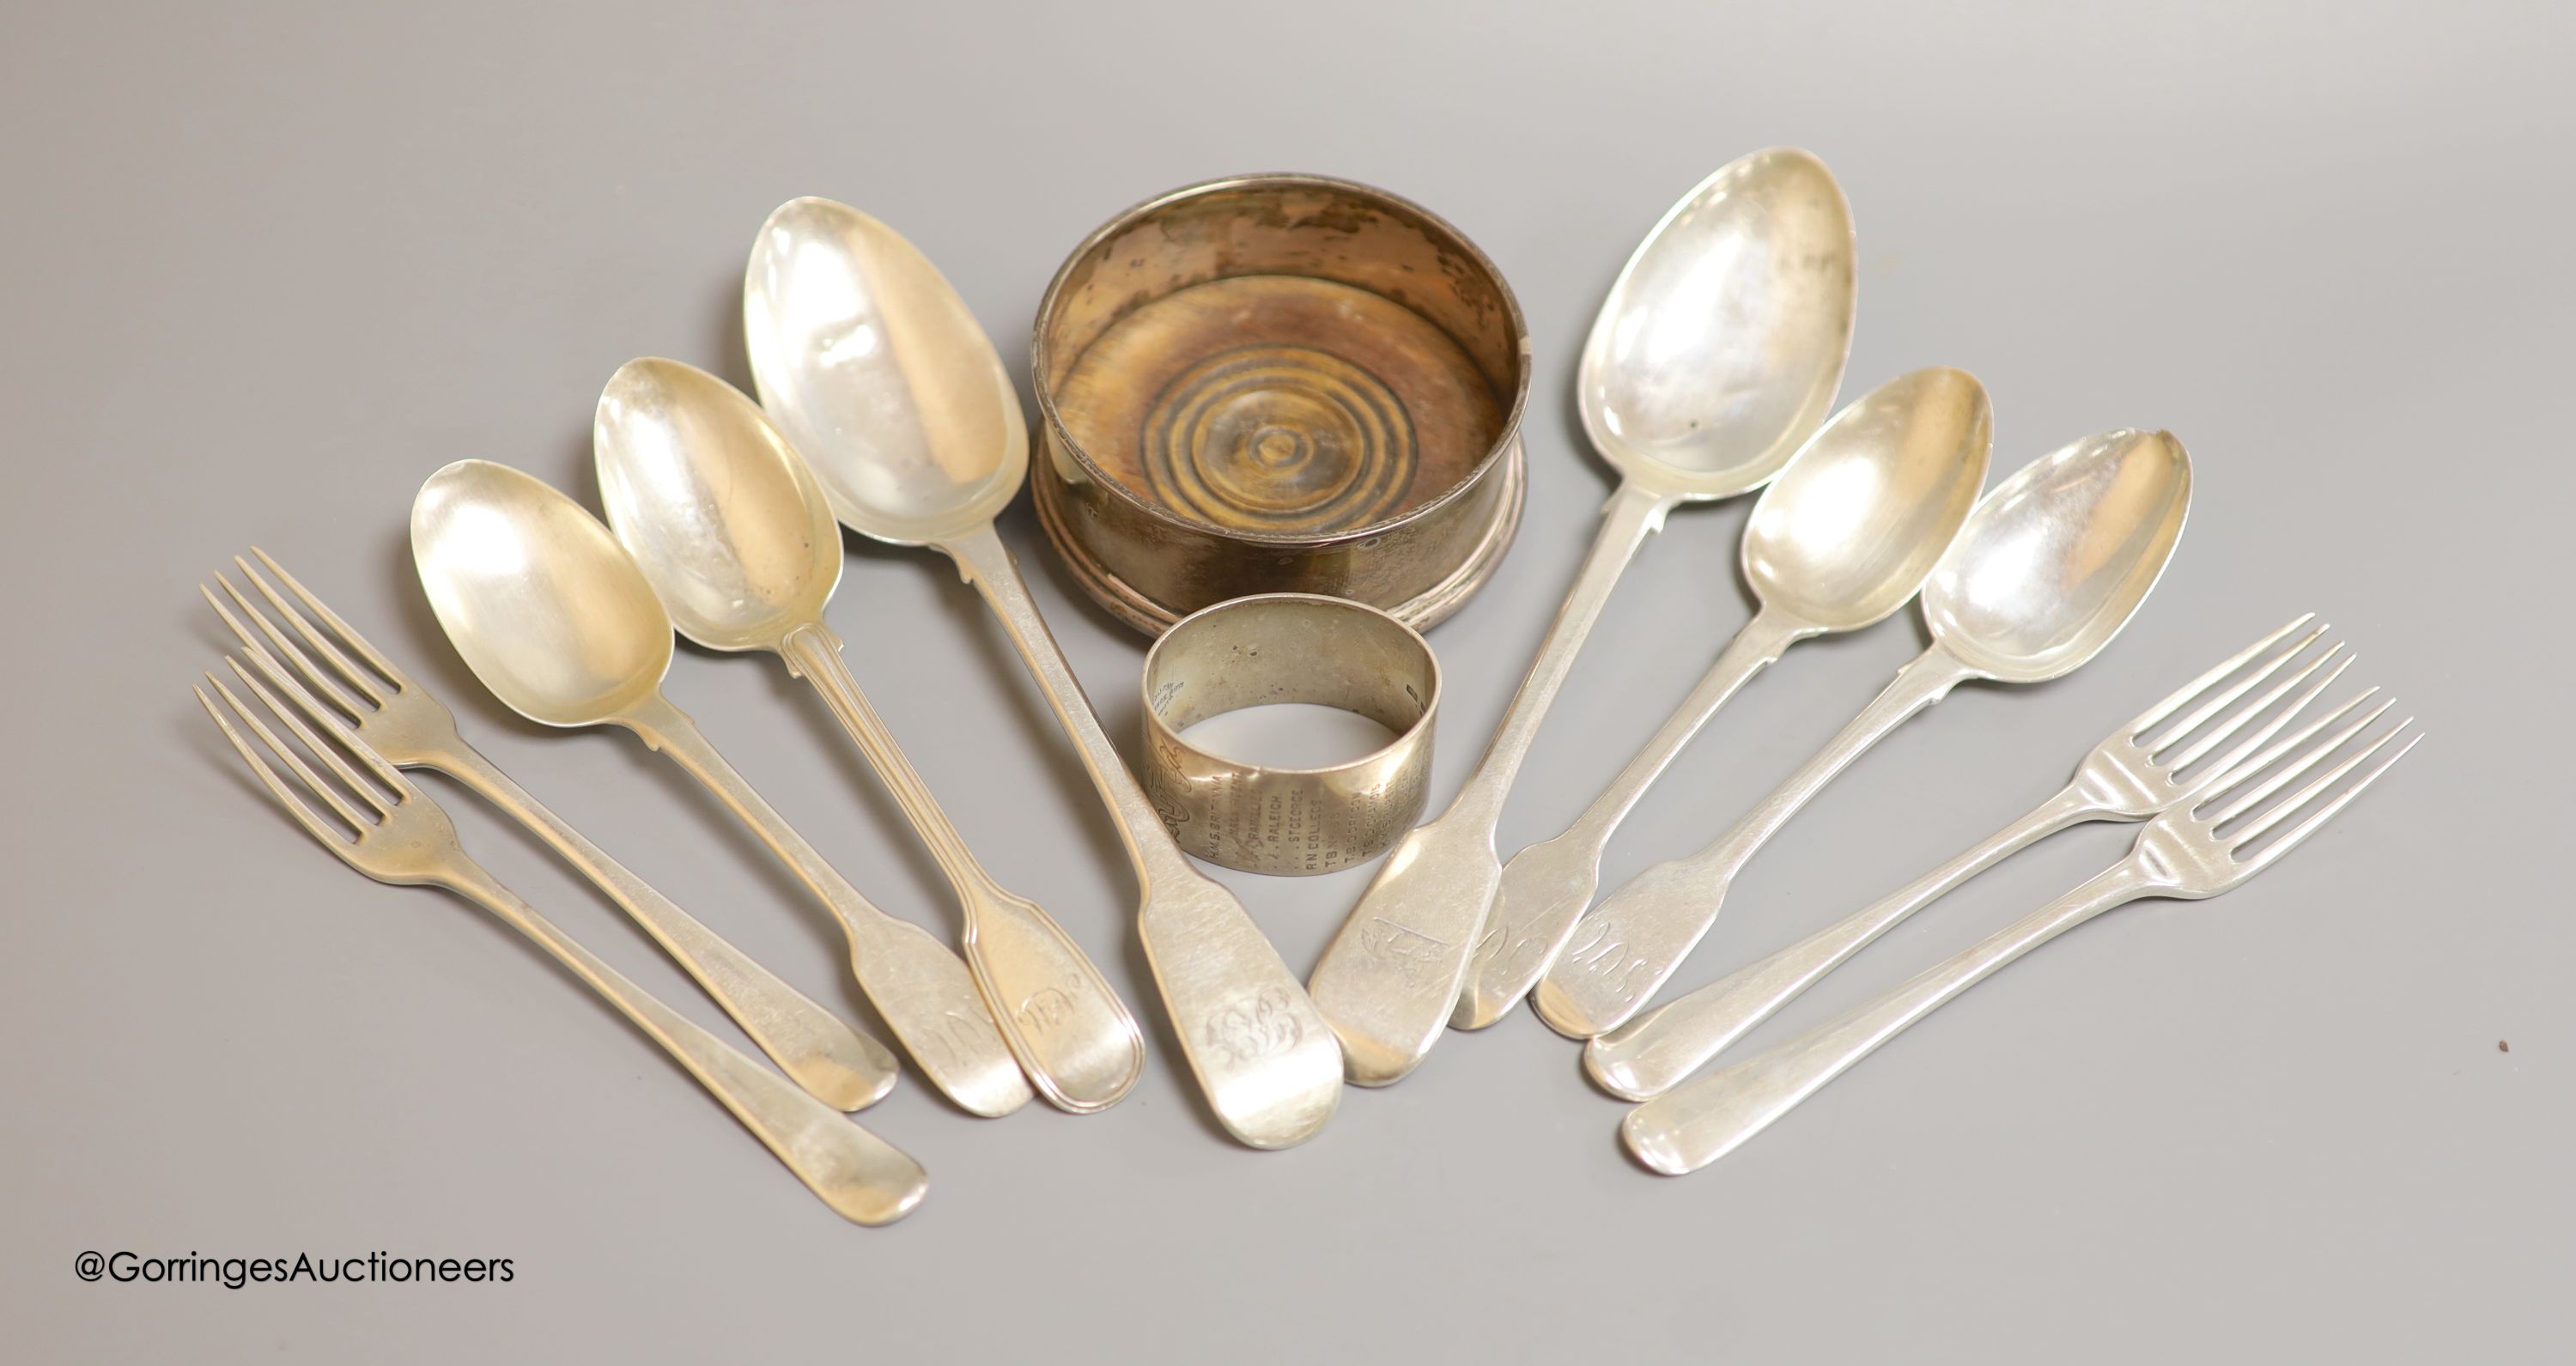 Four George III silver forks, six spoons, a later bottle coaster and a napkin ring